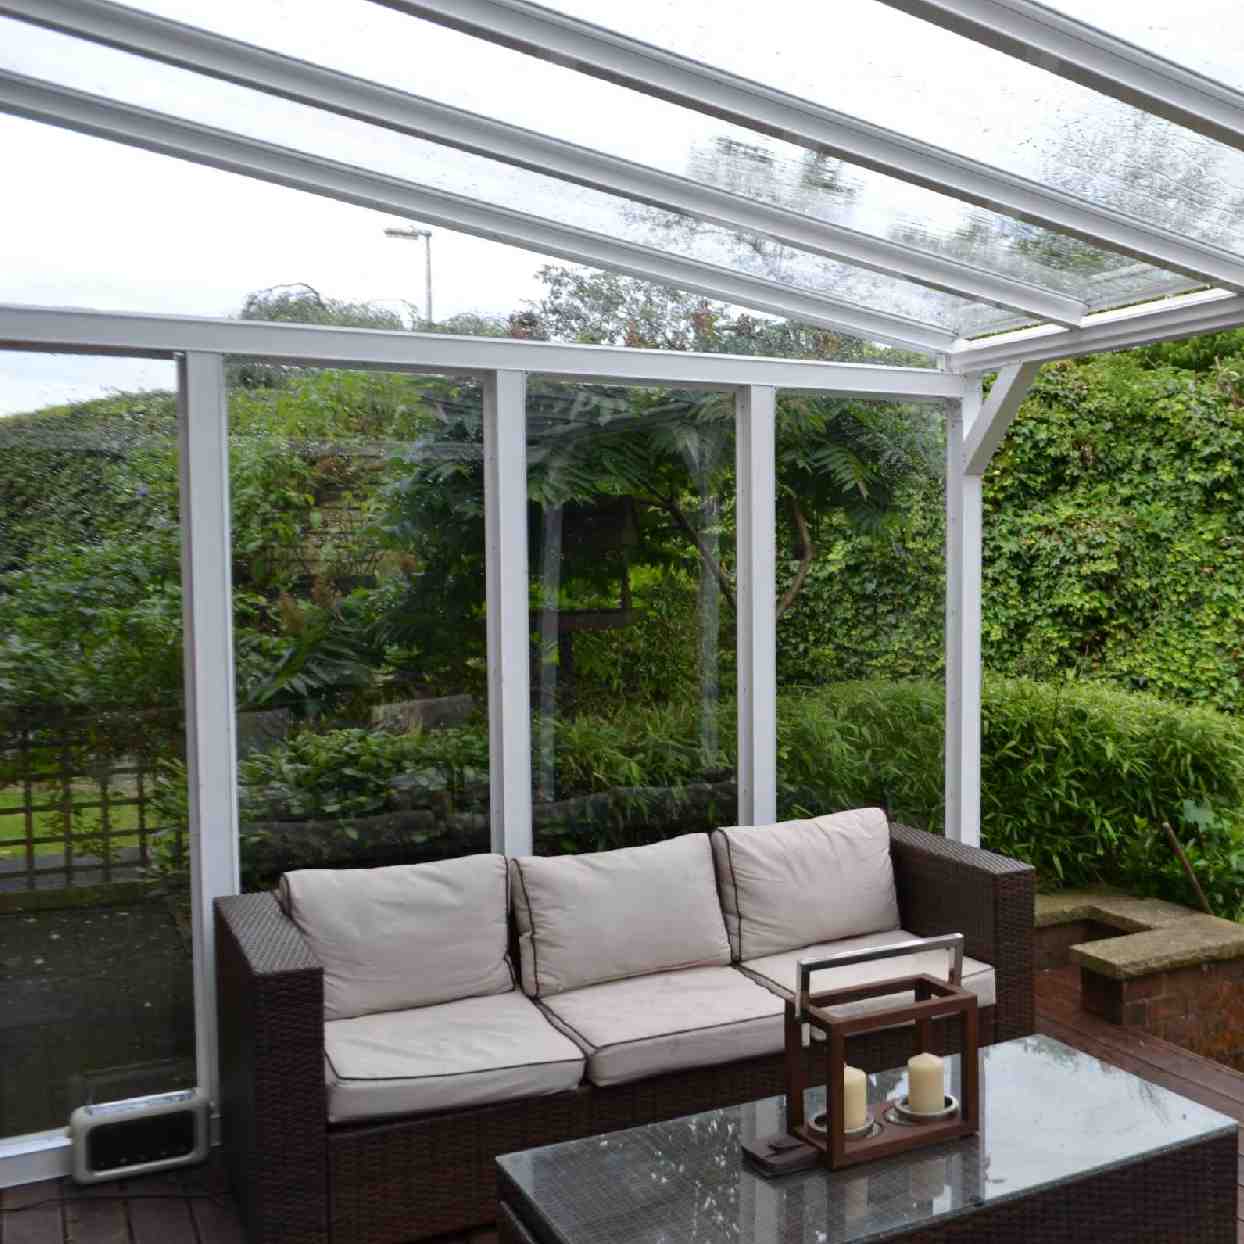 Buy Omega Verandah White with 6mm Glass Clear Plate Polycarbonate Glazing - 4.2m (W) x 1.5m (P), (3) Supporting Posts online today